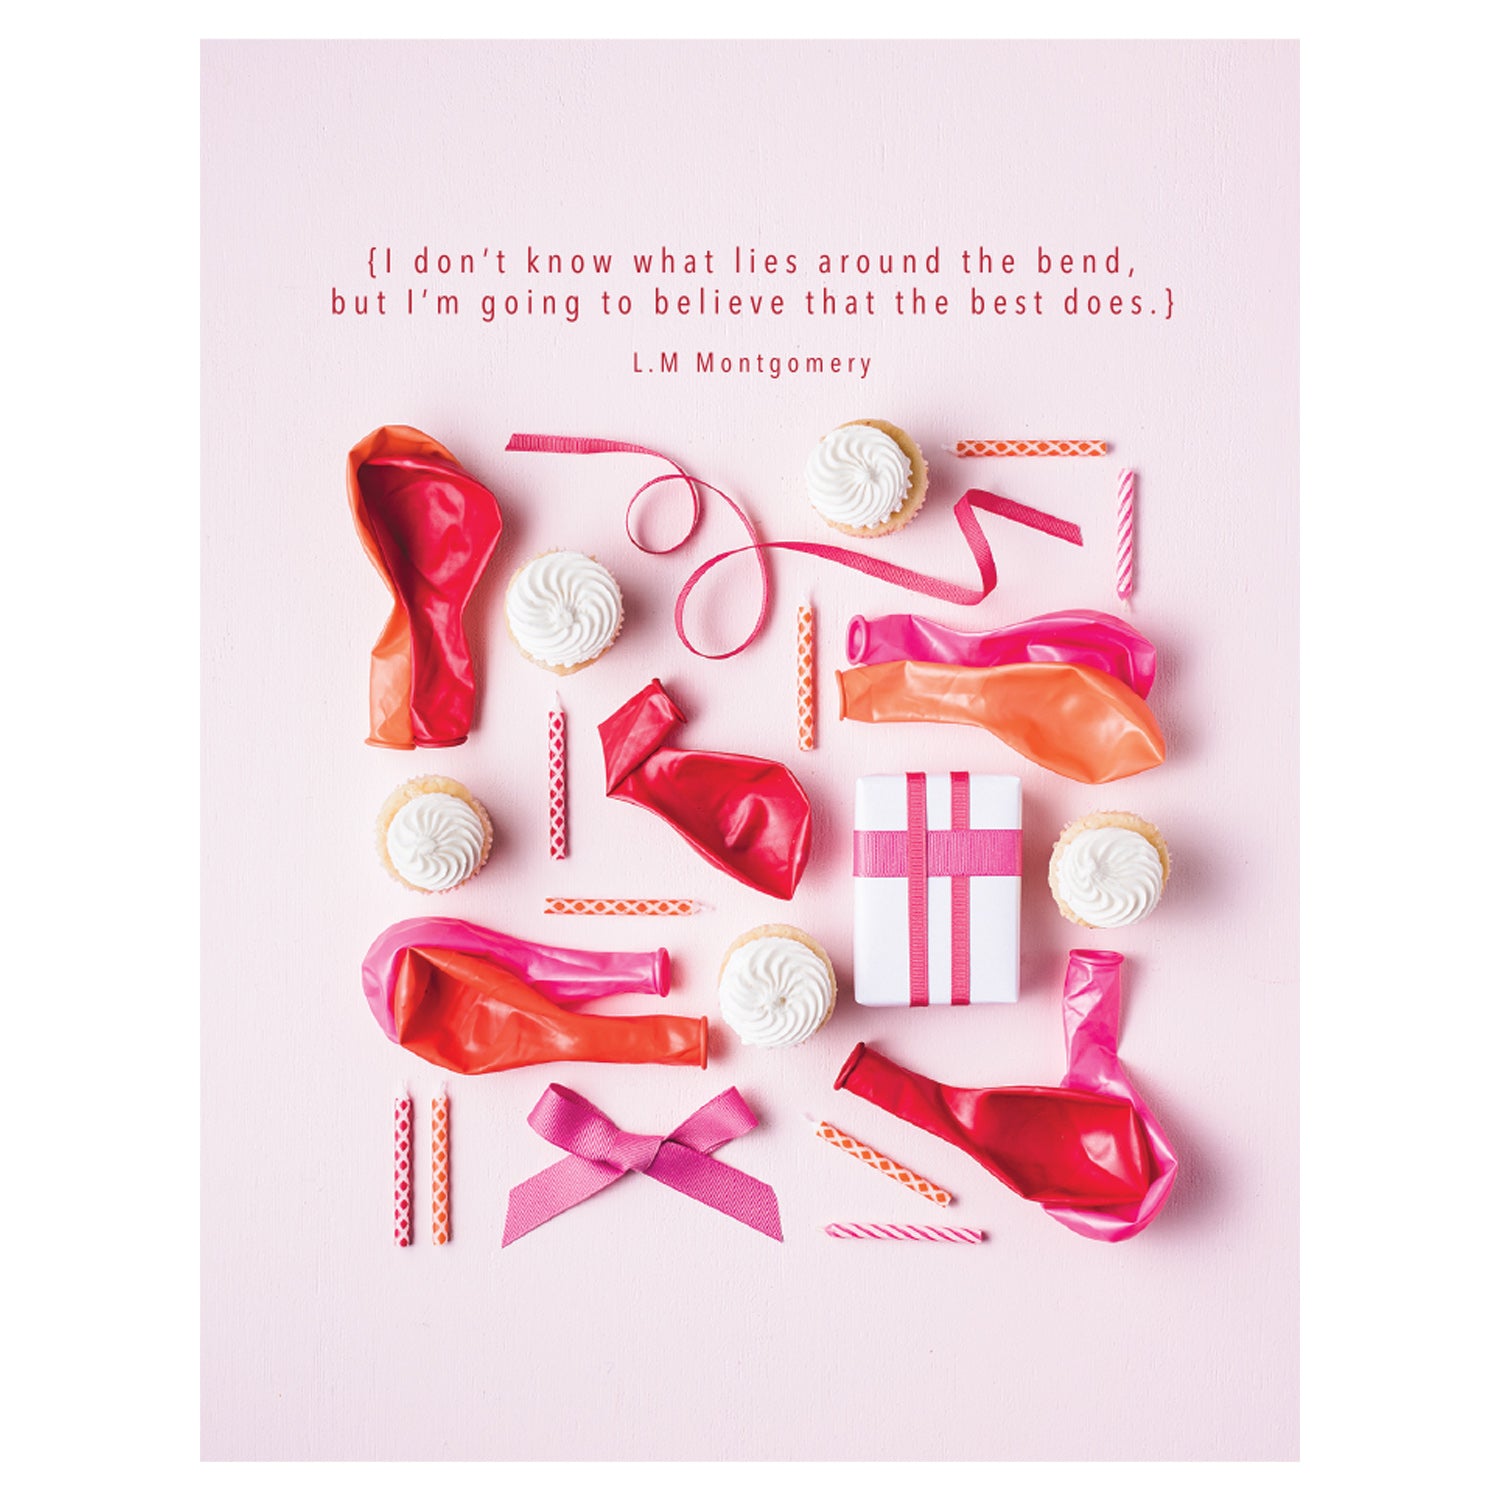 A photo of a collection of items including red shoes, striped candies, meringues, pink ribbon, and a gift box arranged on a light pink background with &quot;{I don&